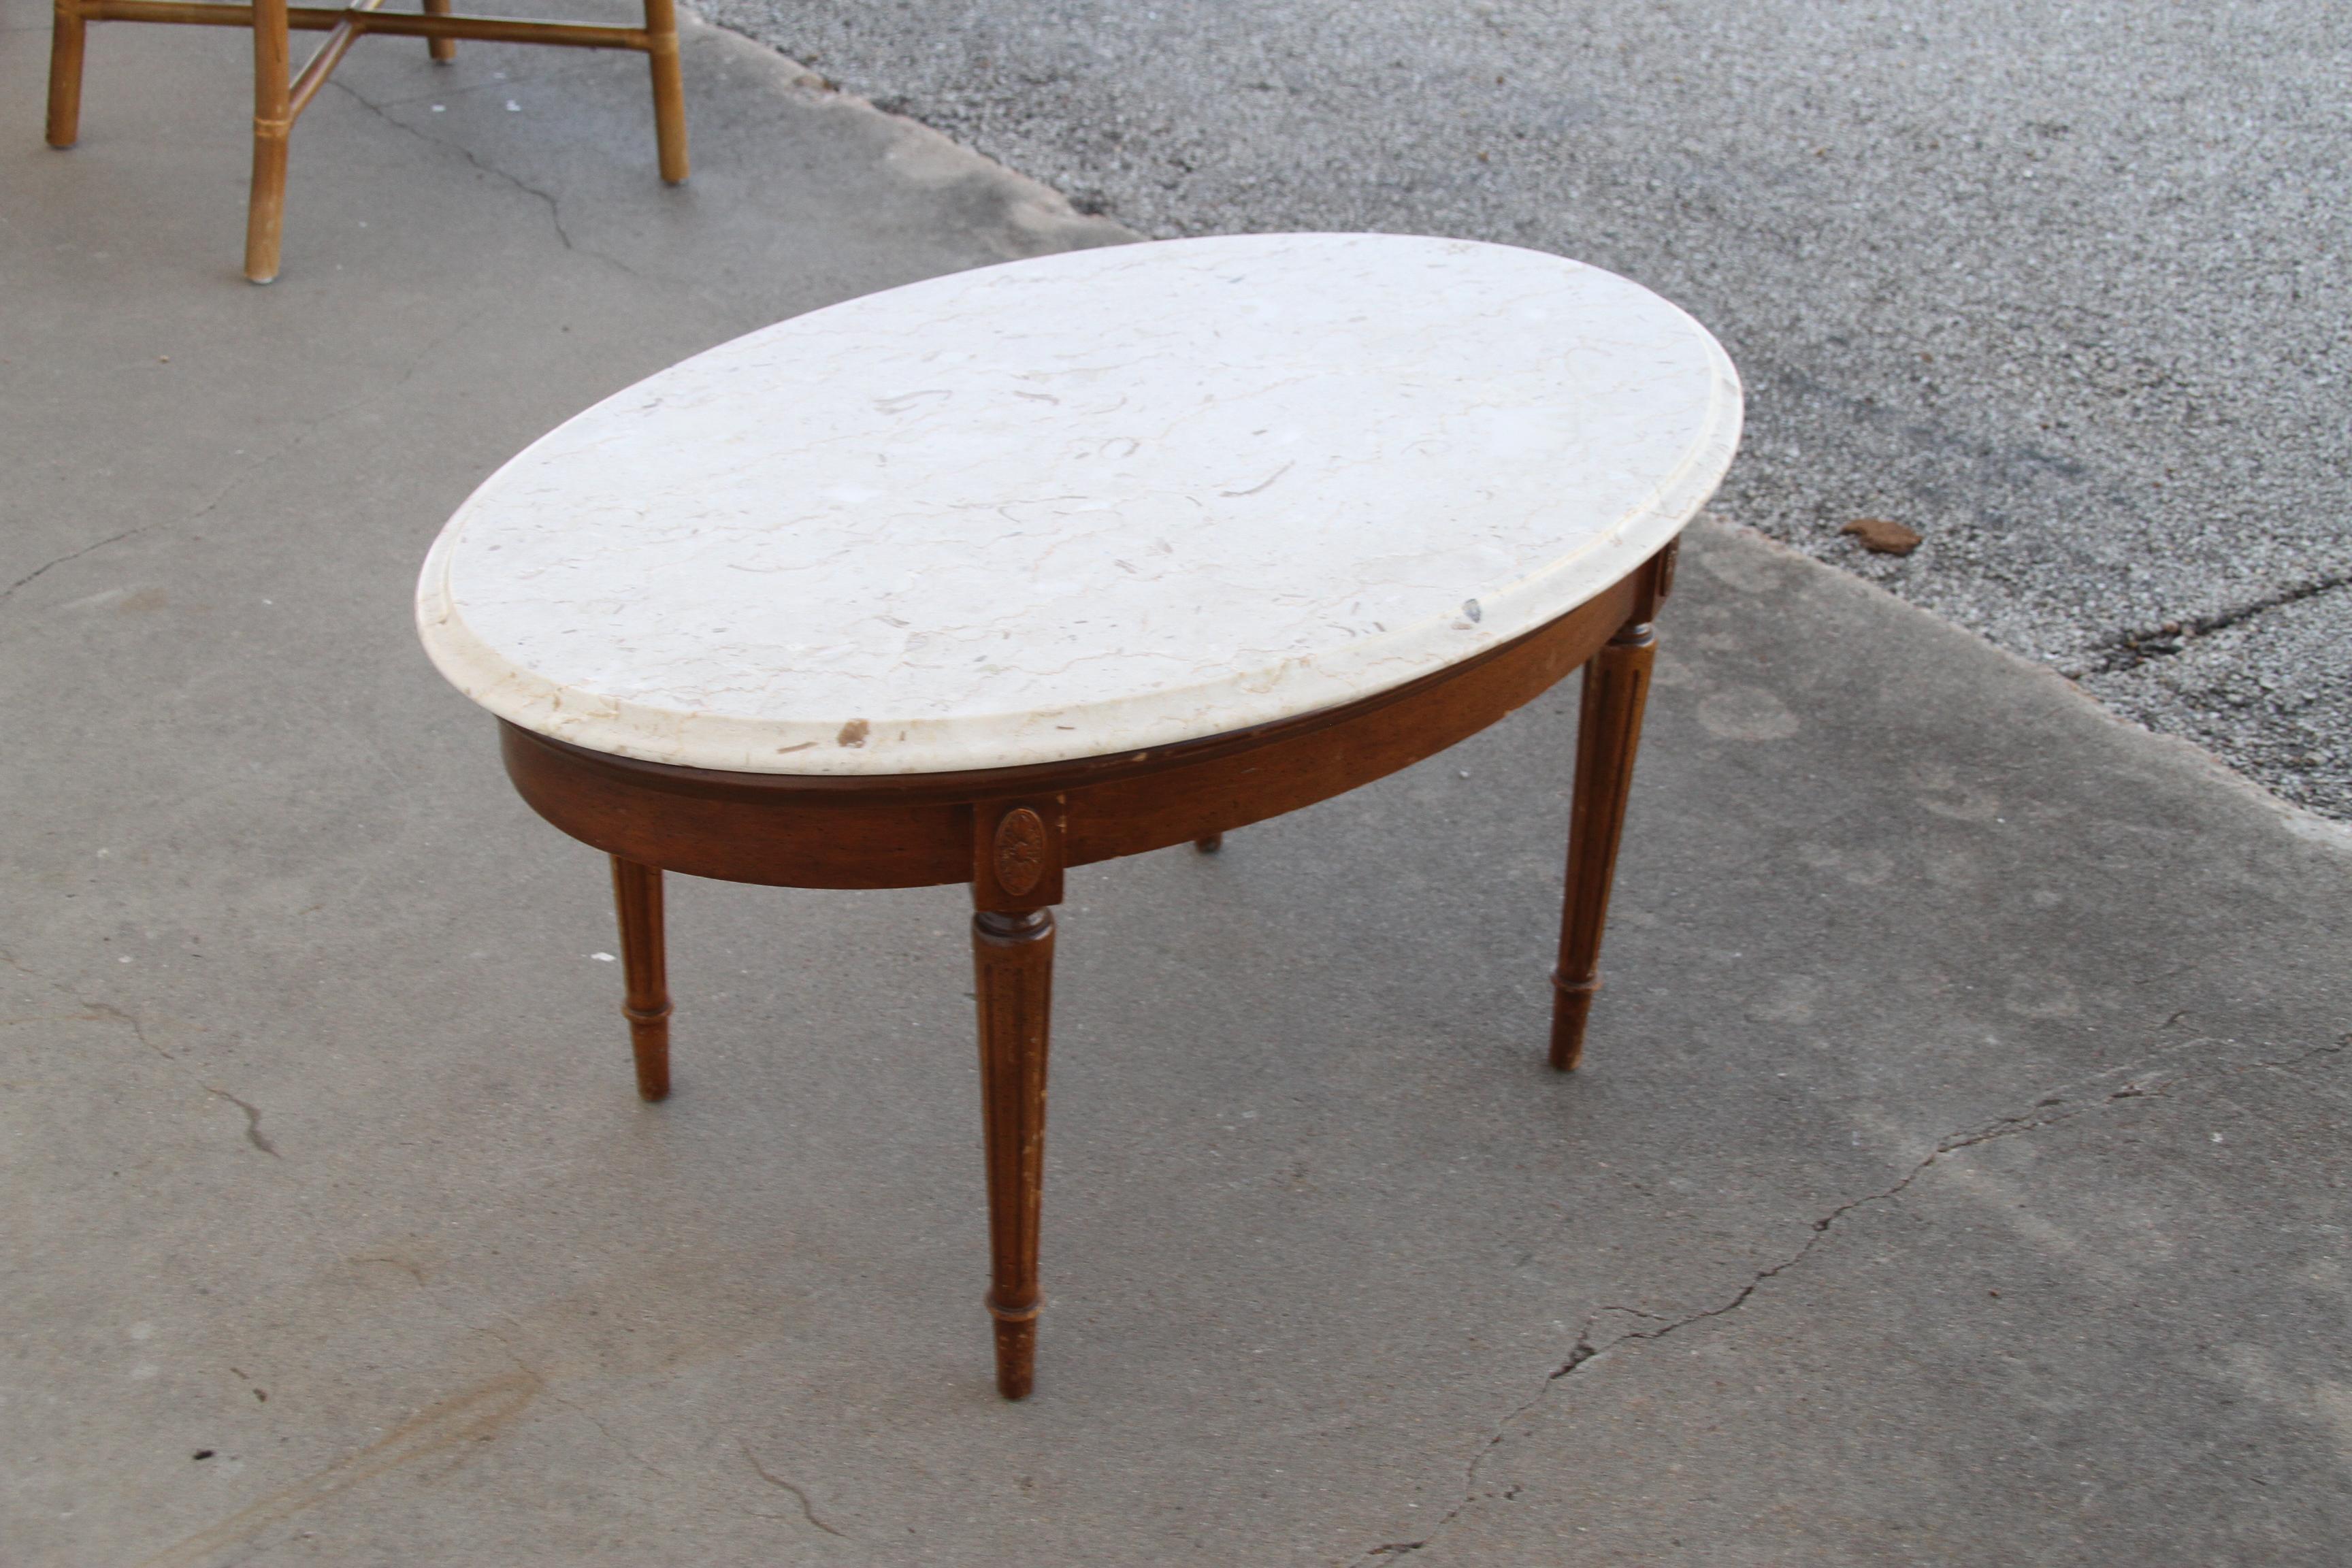 Federal Style marble coffee table.

Oval table in mahogany with white marble top. Carved Federal style legs.

Dimensions: 34